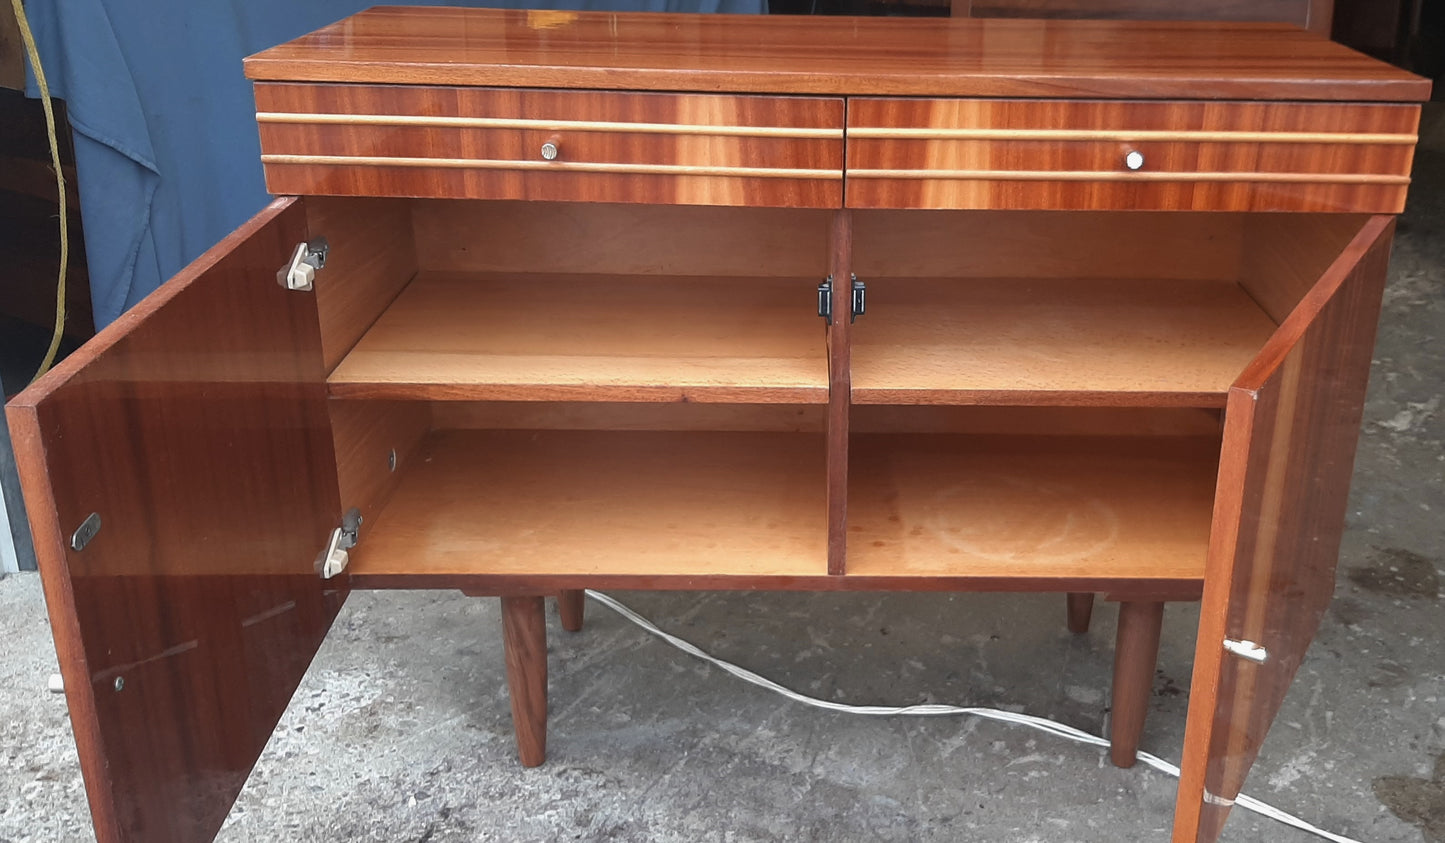 RESTORED MCM Cabinet / Buffet/ Credenza with 2 doors & drawers, 39"